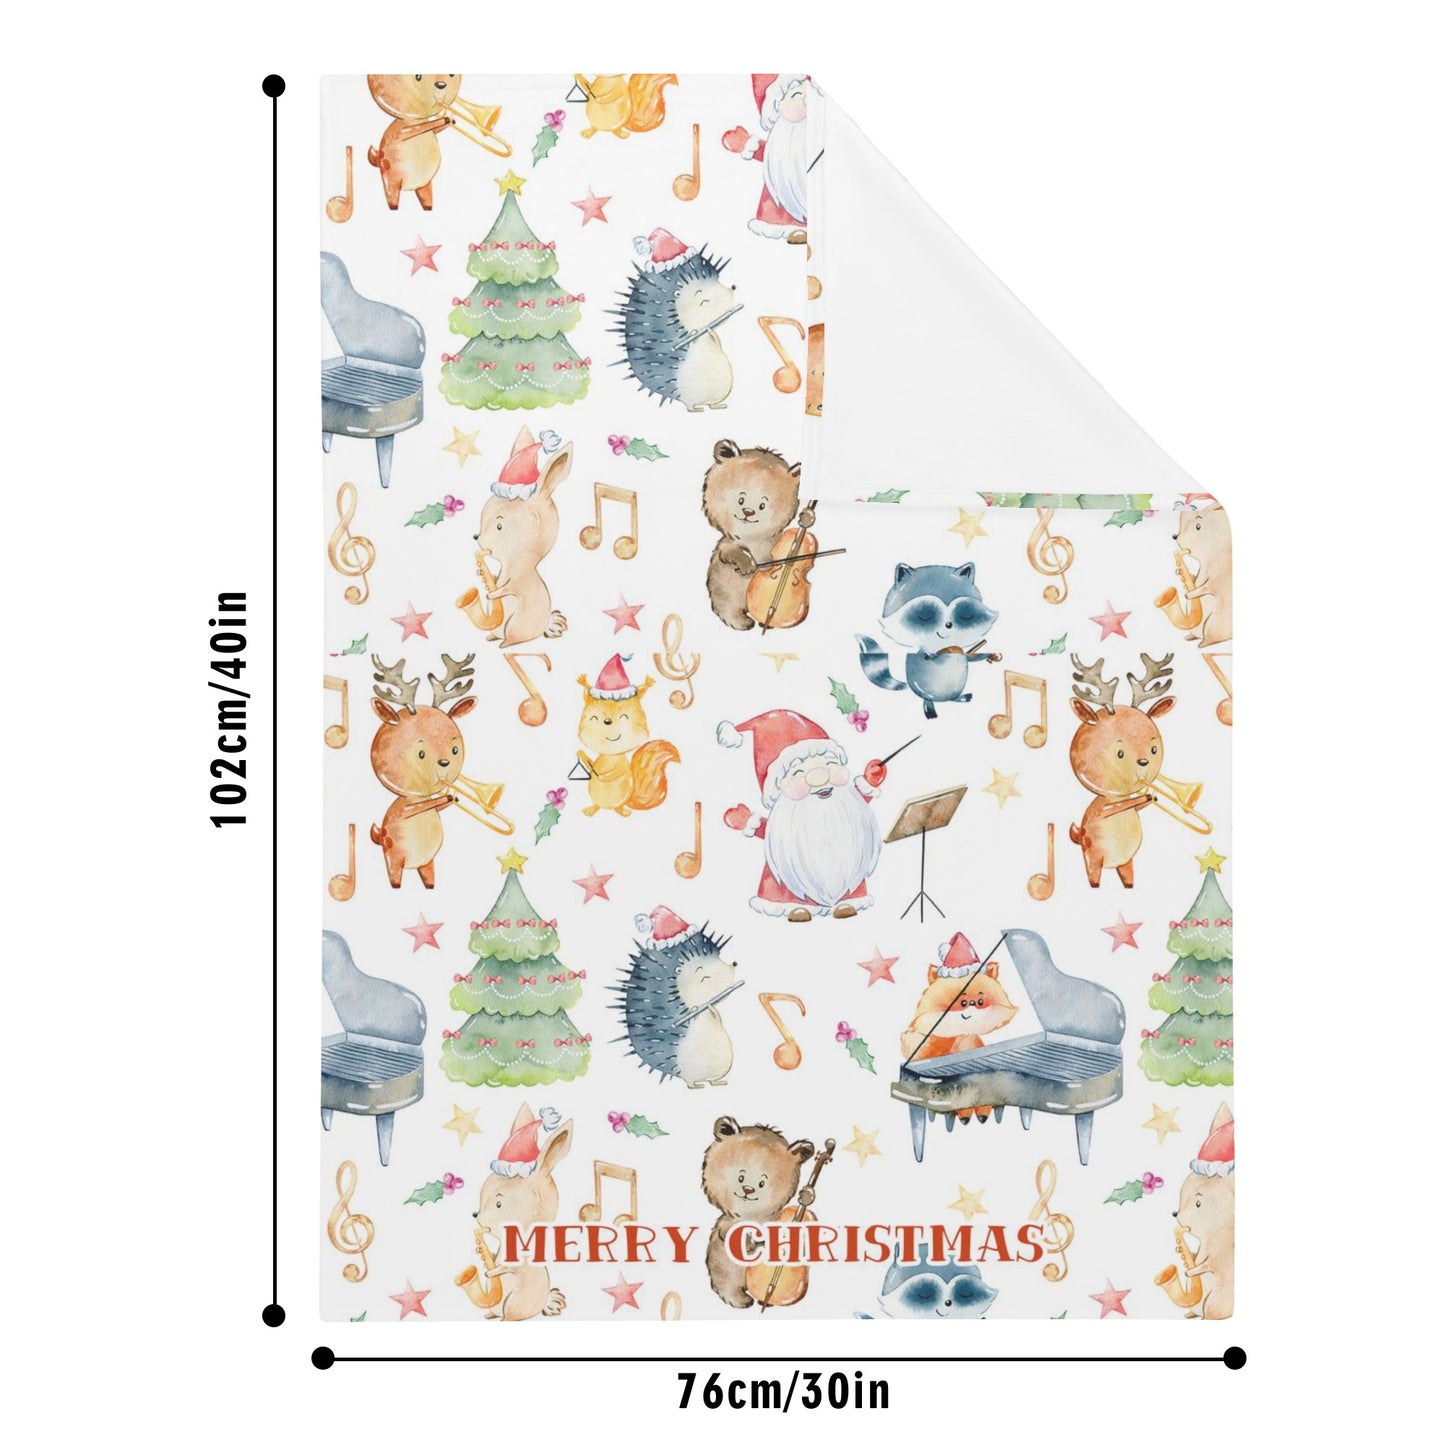 Merry Christmas Critters Soft Flannel Breathable Blanket